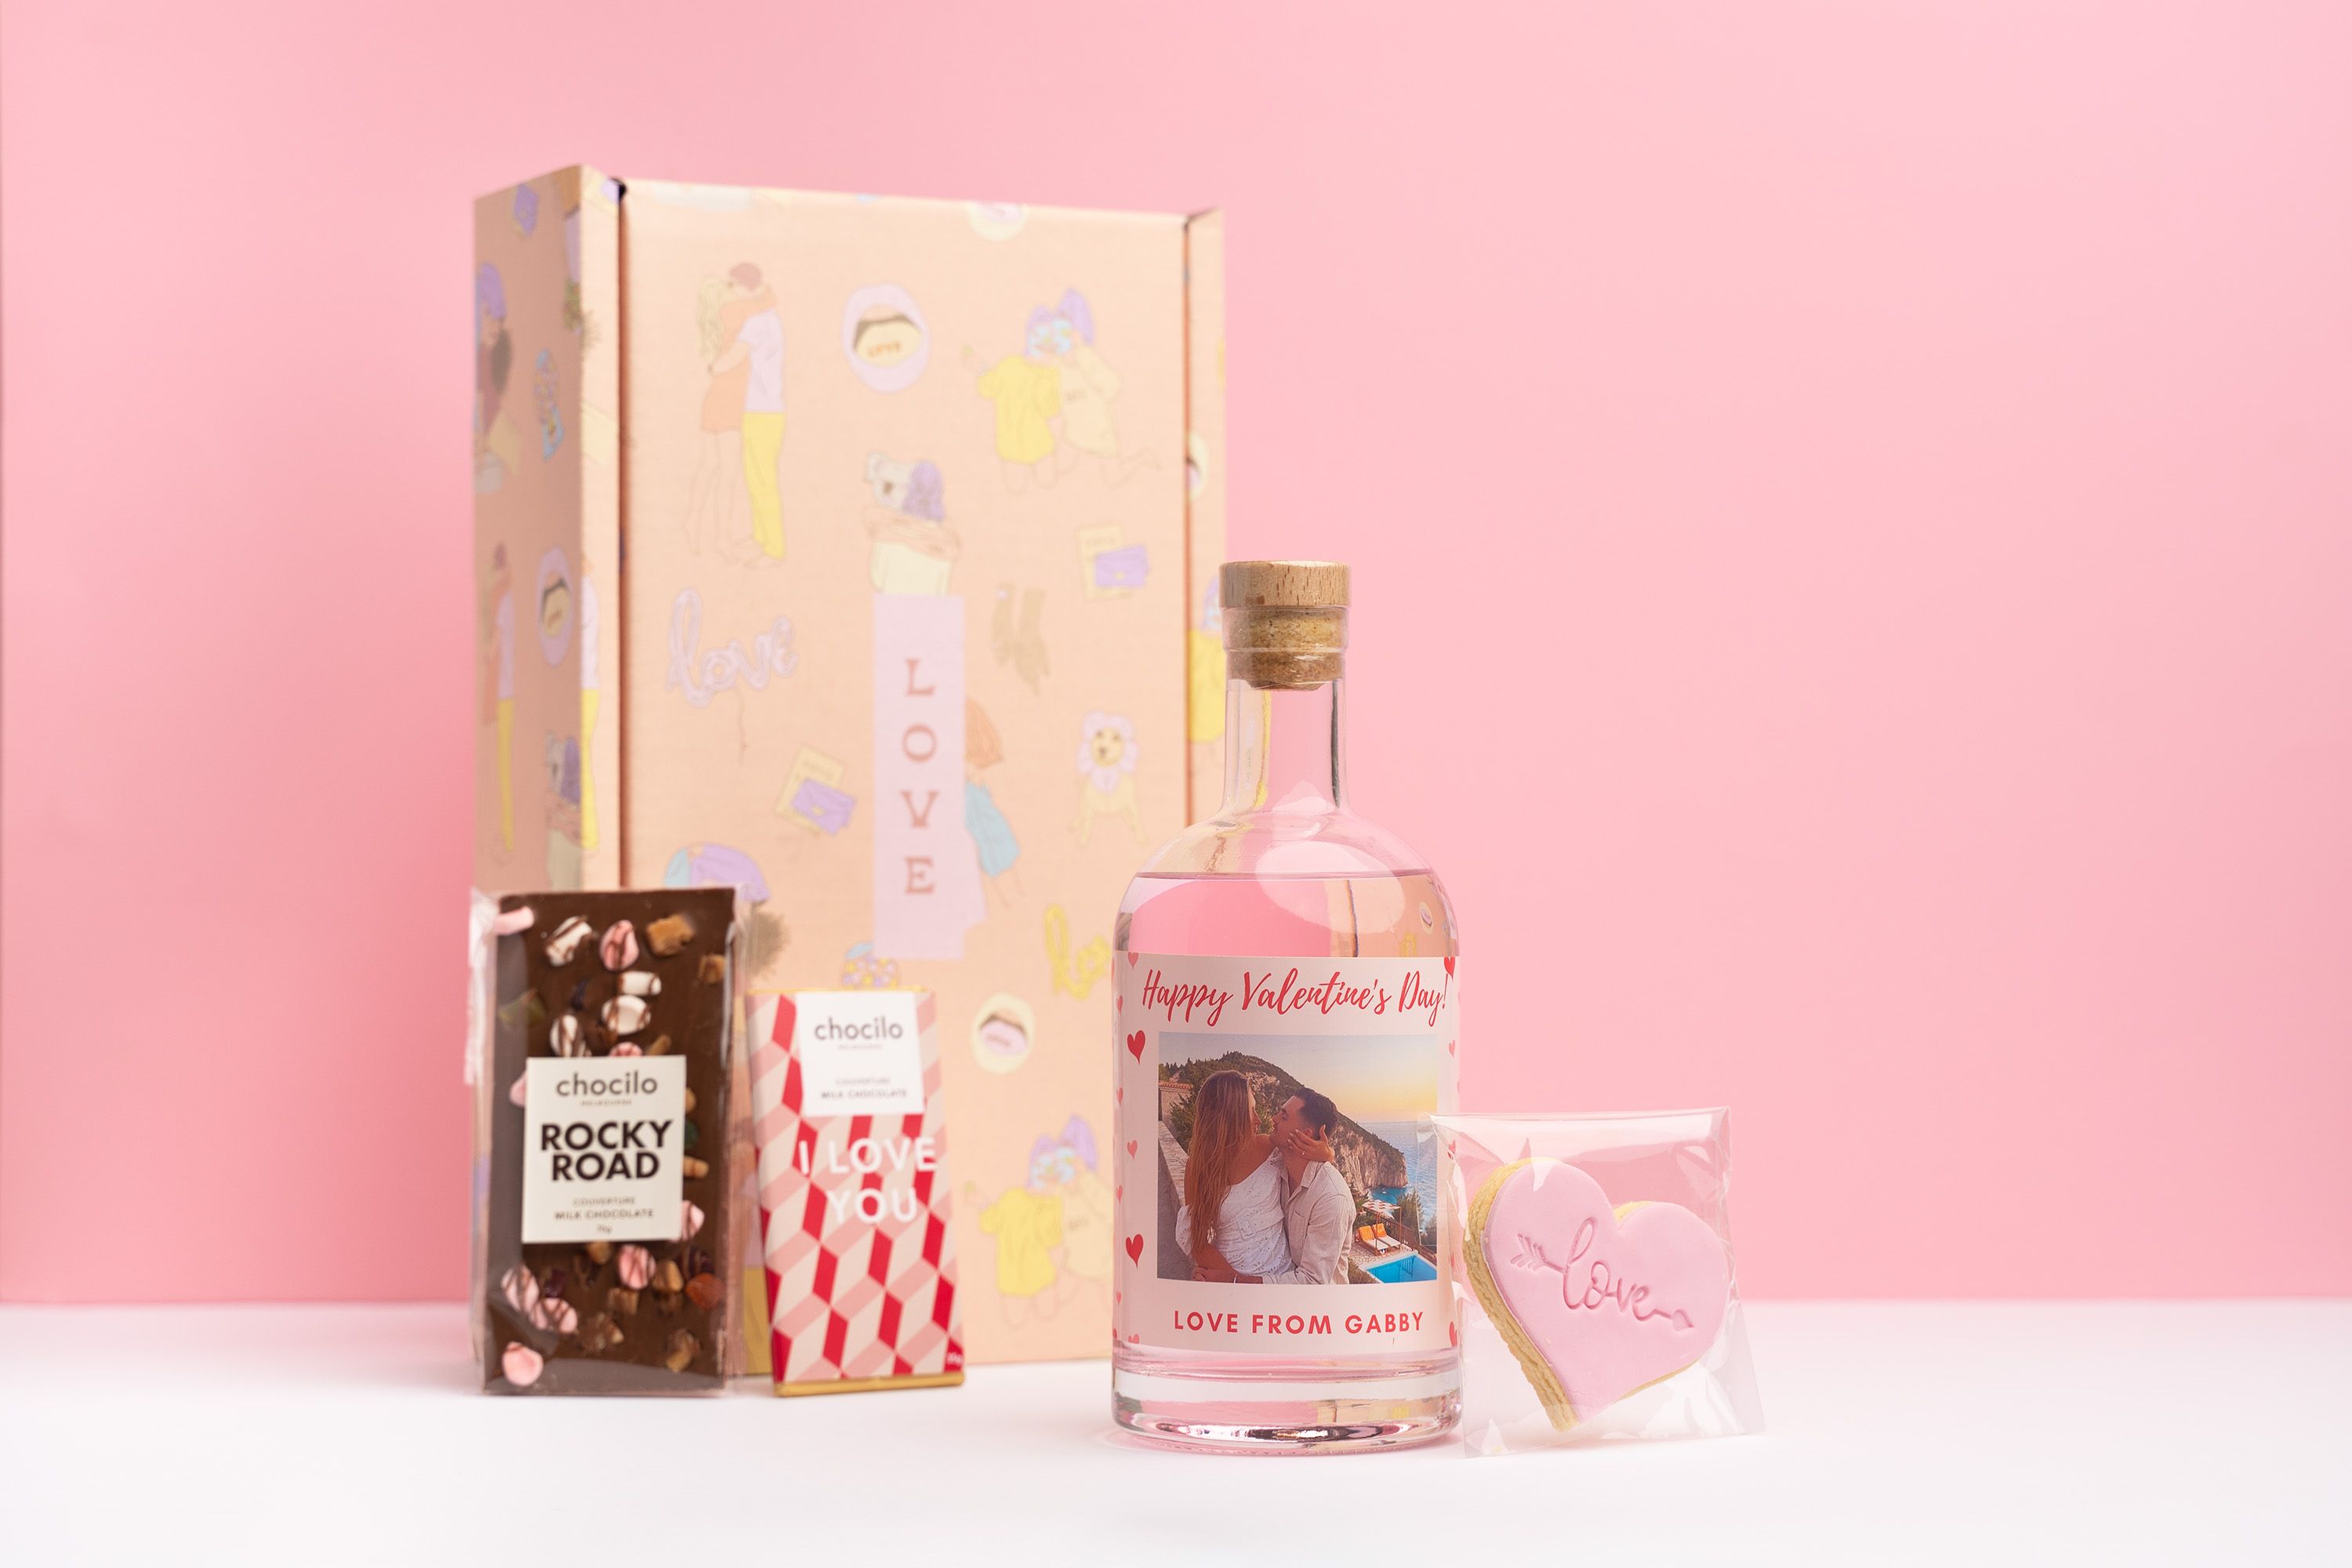 personalised pin gin bottle with a rocky road chocolate bar, I love you choc and love heart cookie in a love gift box